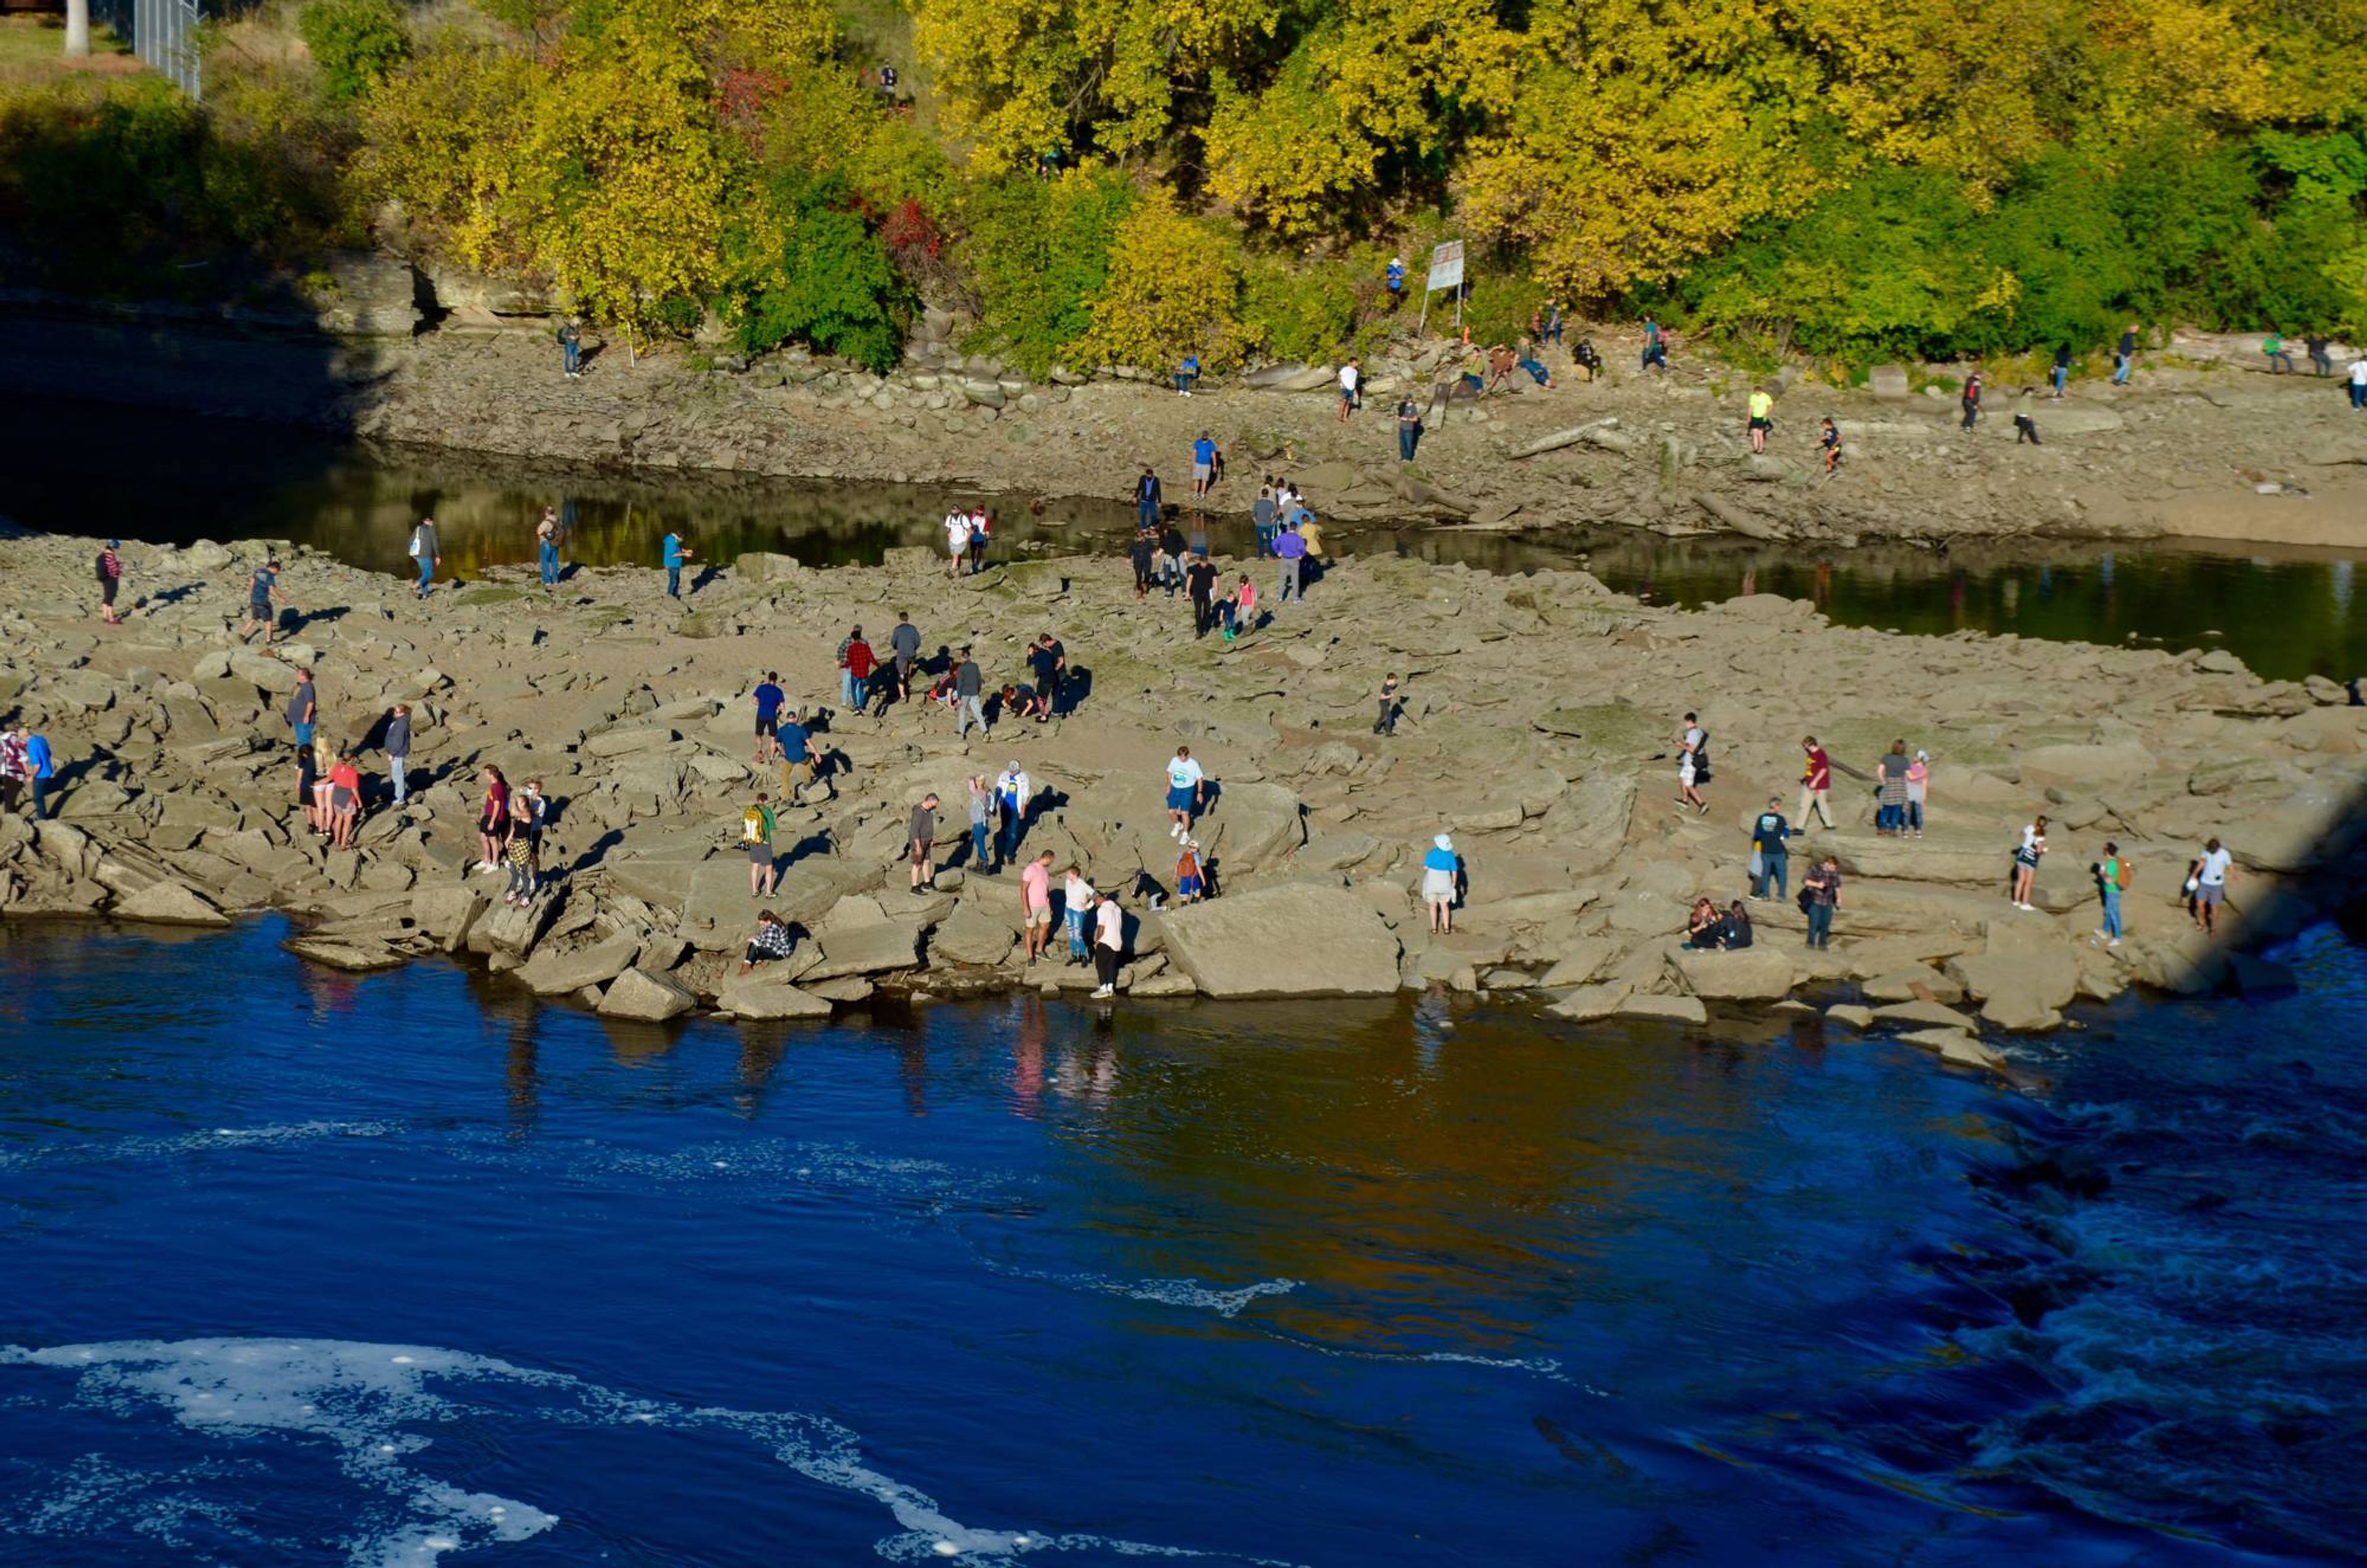 Exploring the Mississippi River in Minneapolis on October 7, 2020